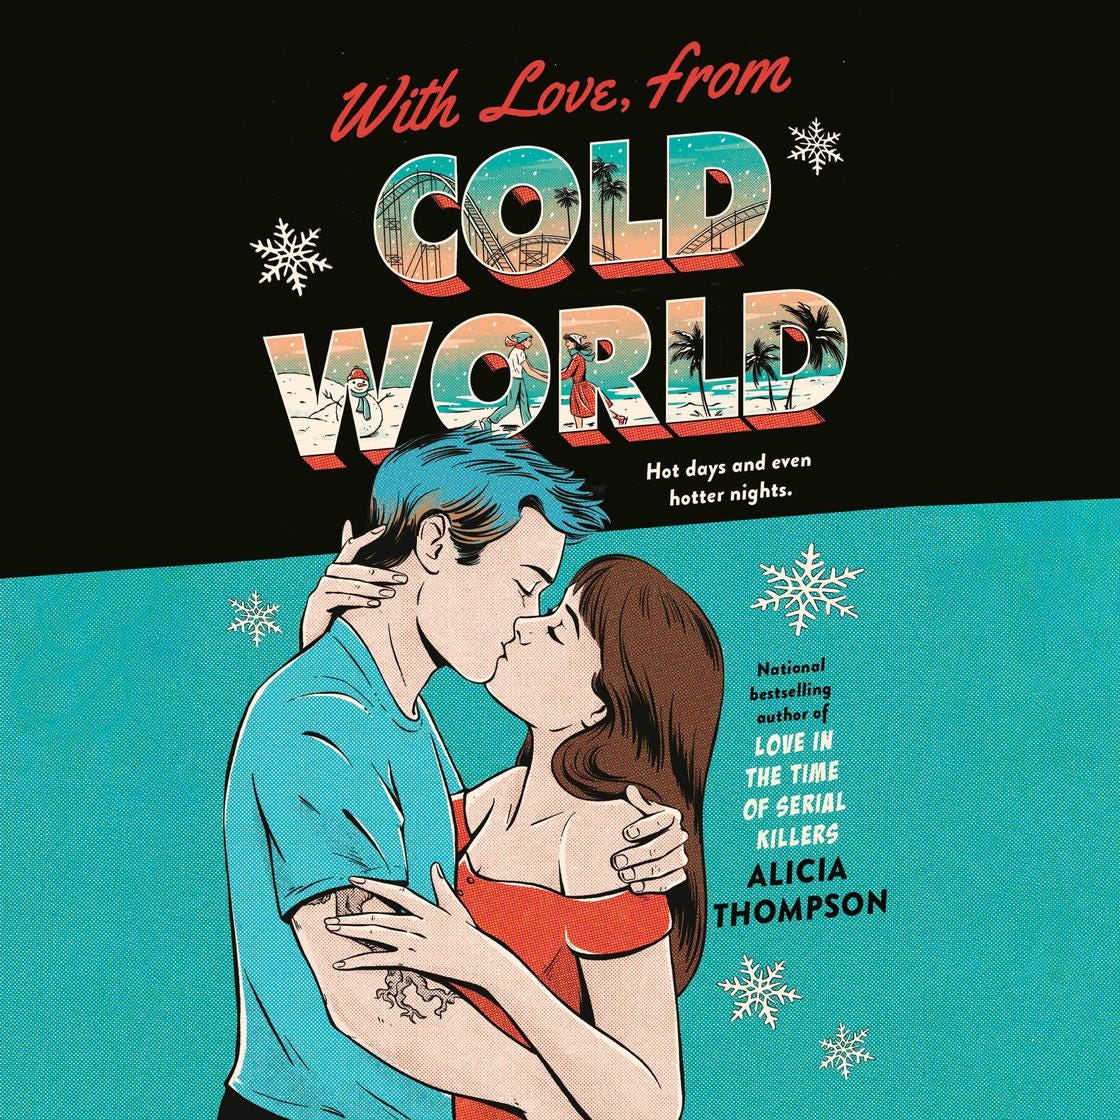 Audiobook cover for With Love, from Cold World, that has the text of the title up top, with Cold World written in postcard-style letters with winter and Florida theme park imagery inside, the tagline "Hot days and even hotter nights" under that, and then a picture of a white couple kissing -- him with blue hair and a tattoo on his arm and wearing a blue shirt, her with brown hair and wearing an off-the-shoulder red dress. Then it says National Bestselling Author of Love in the Time of Serial Killers Alicia Thompson, which feels pretty good.